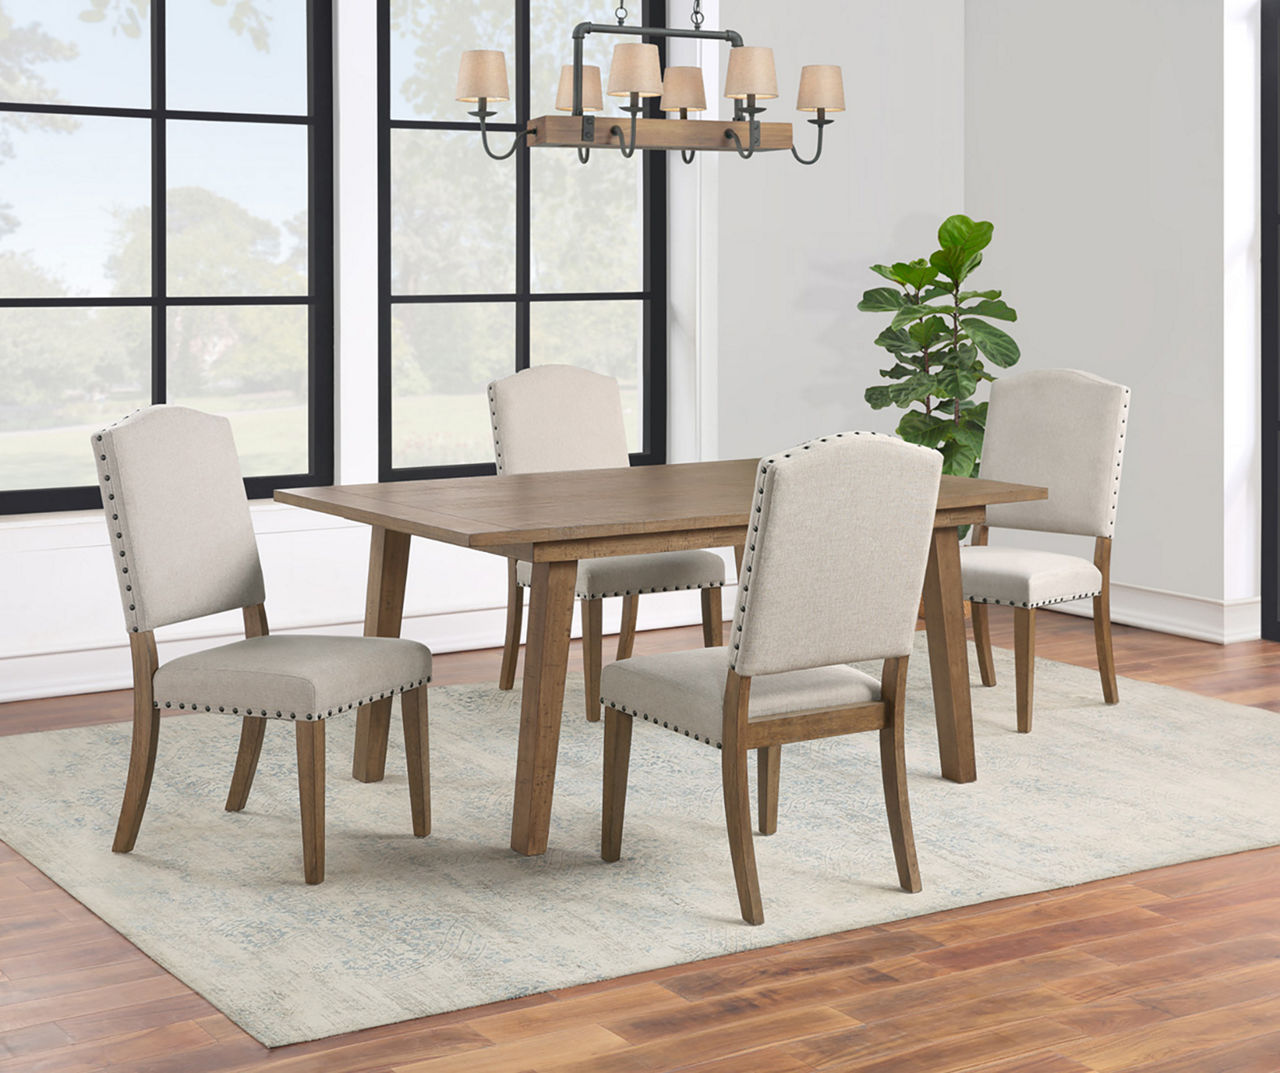 Broyhill Heirlooms Dining Table Big Lots